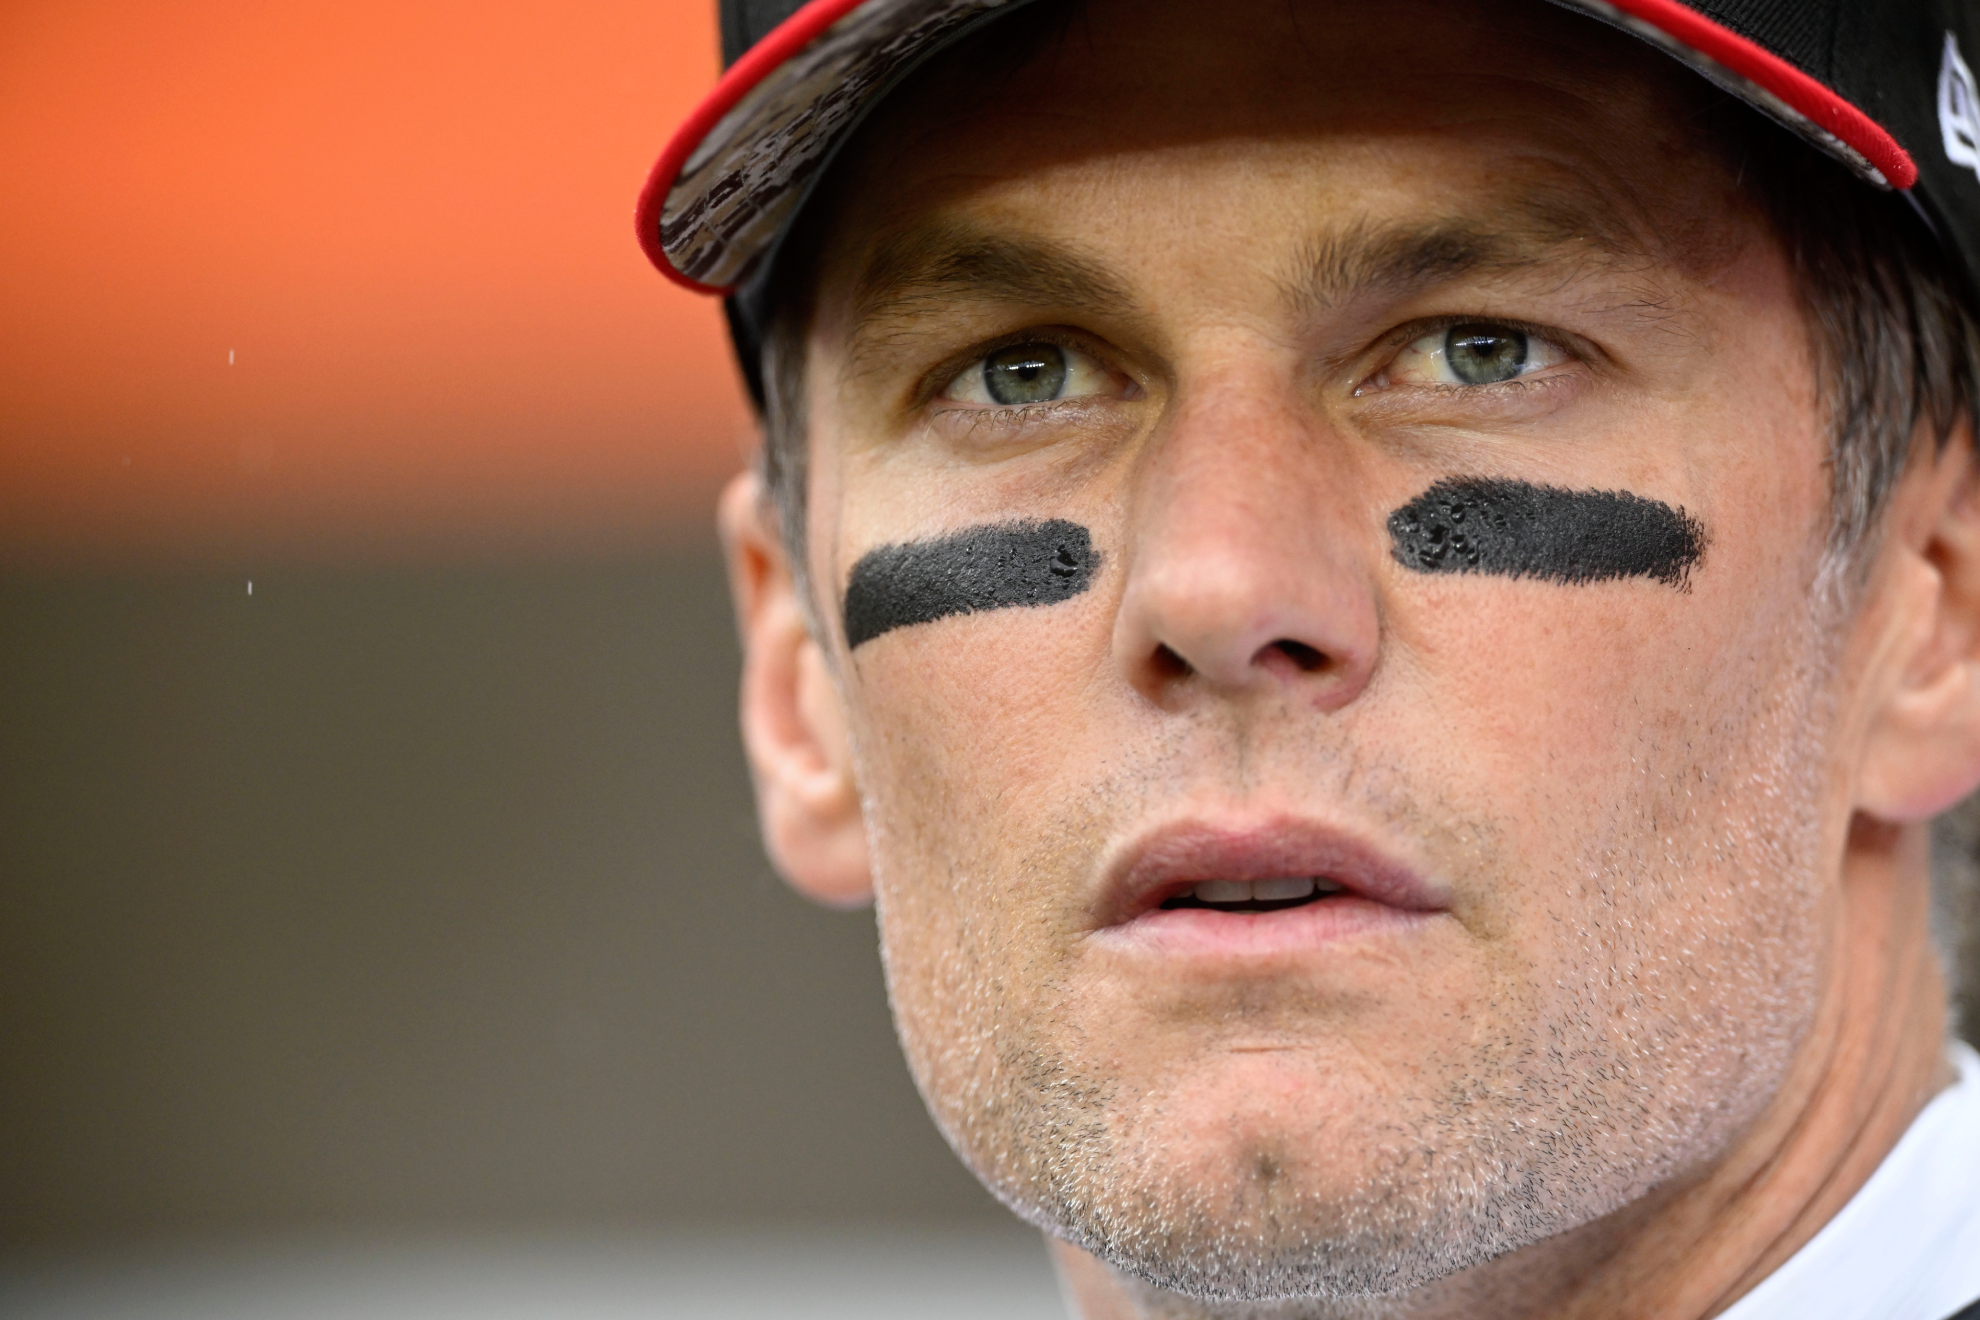 Tom Brady calls out 'mediocre' NFL with Steven A Smith in epic rant about the league